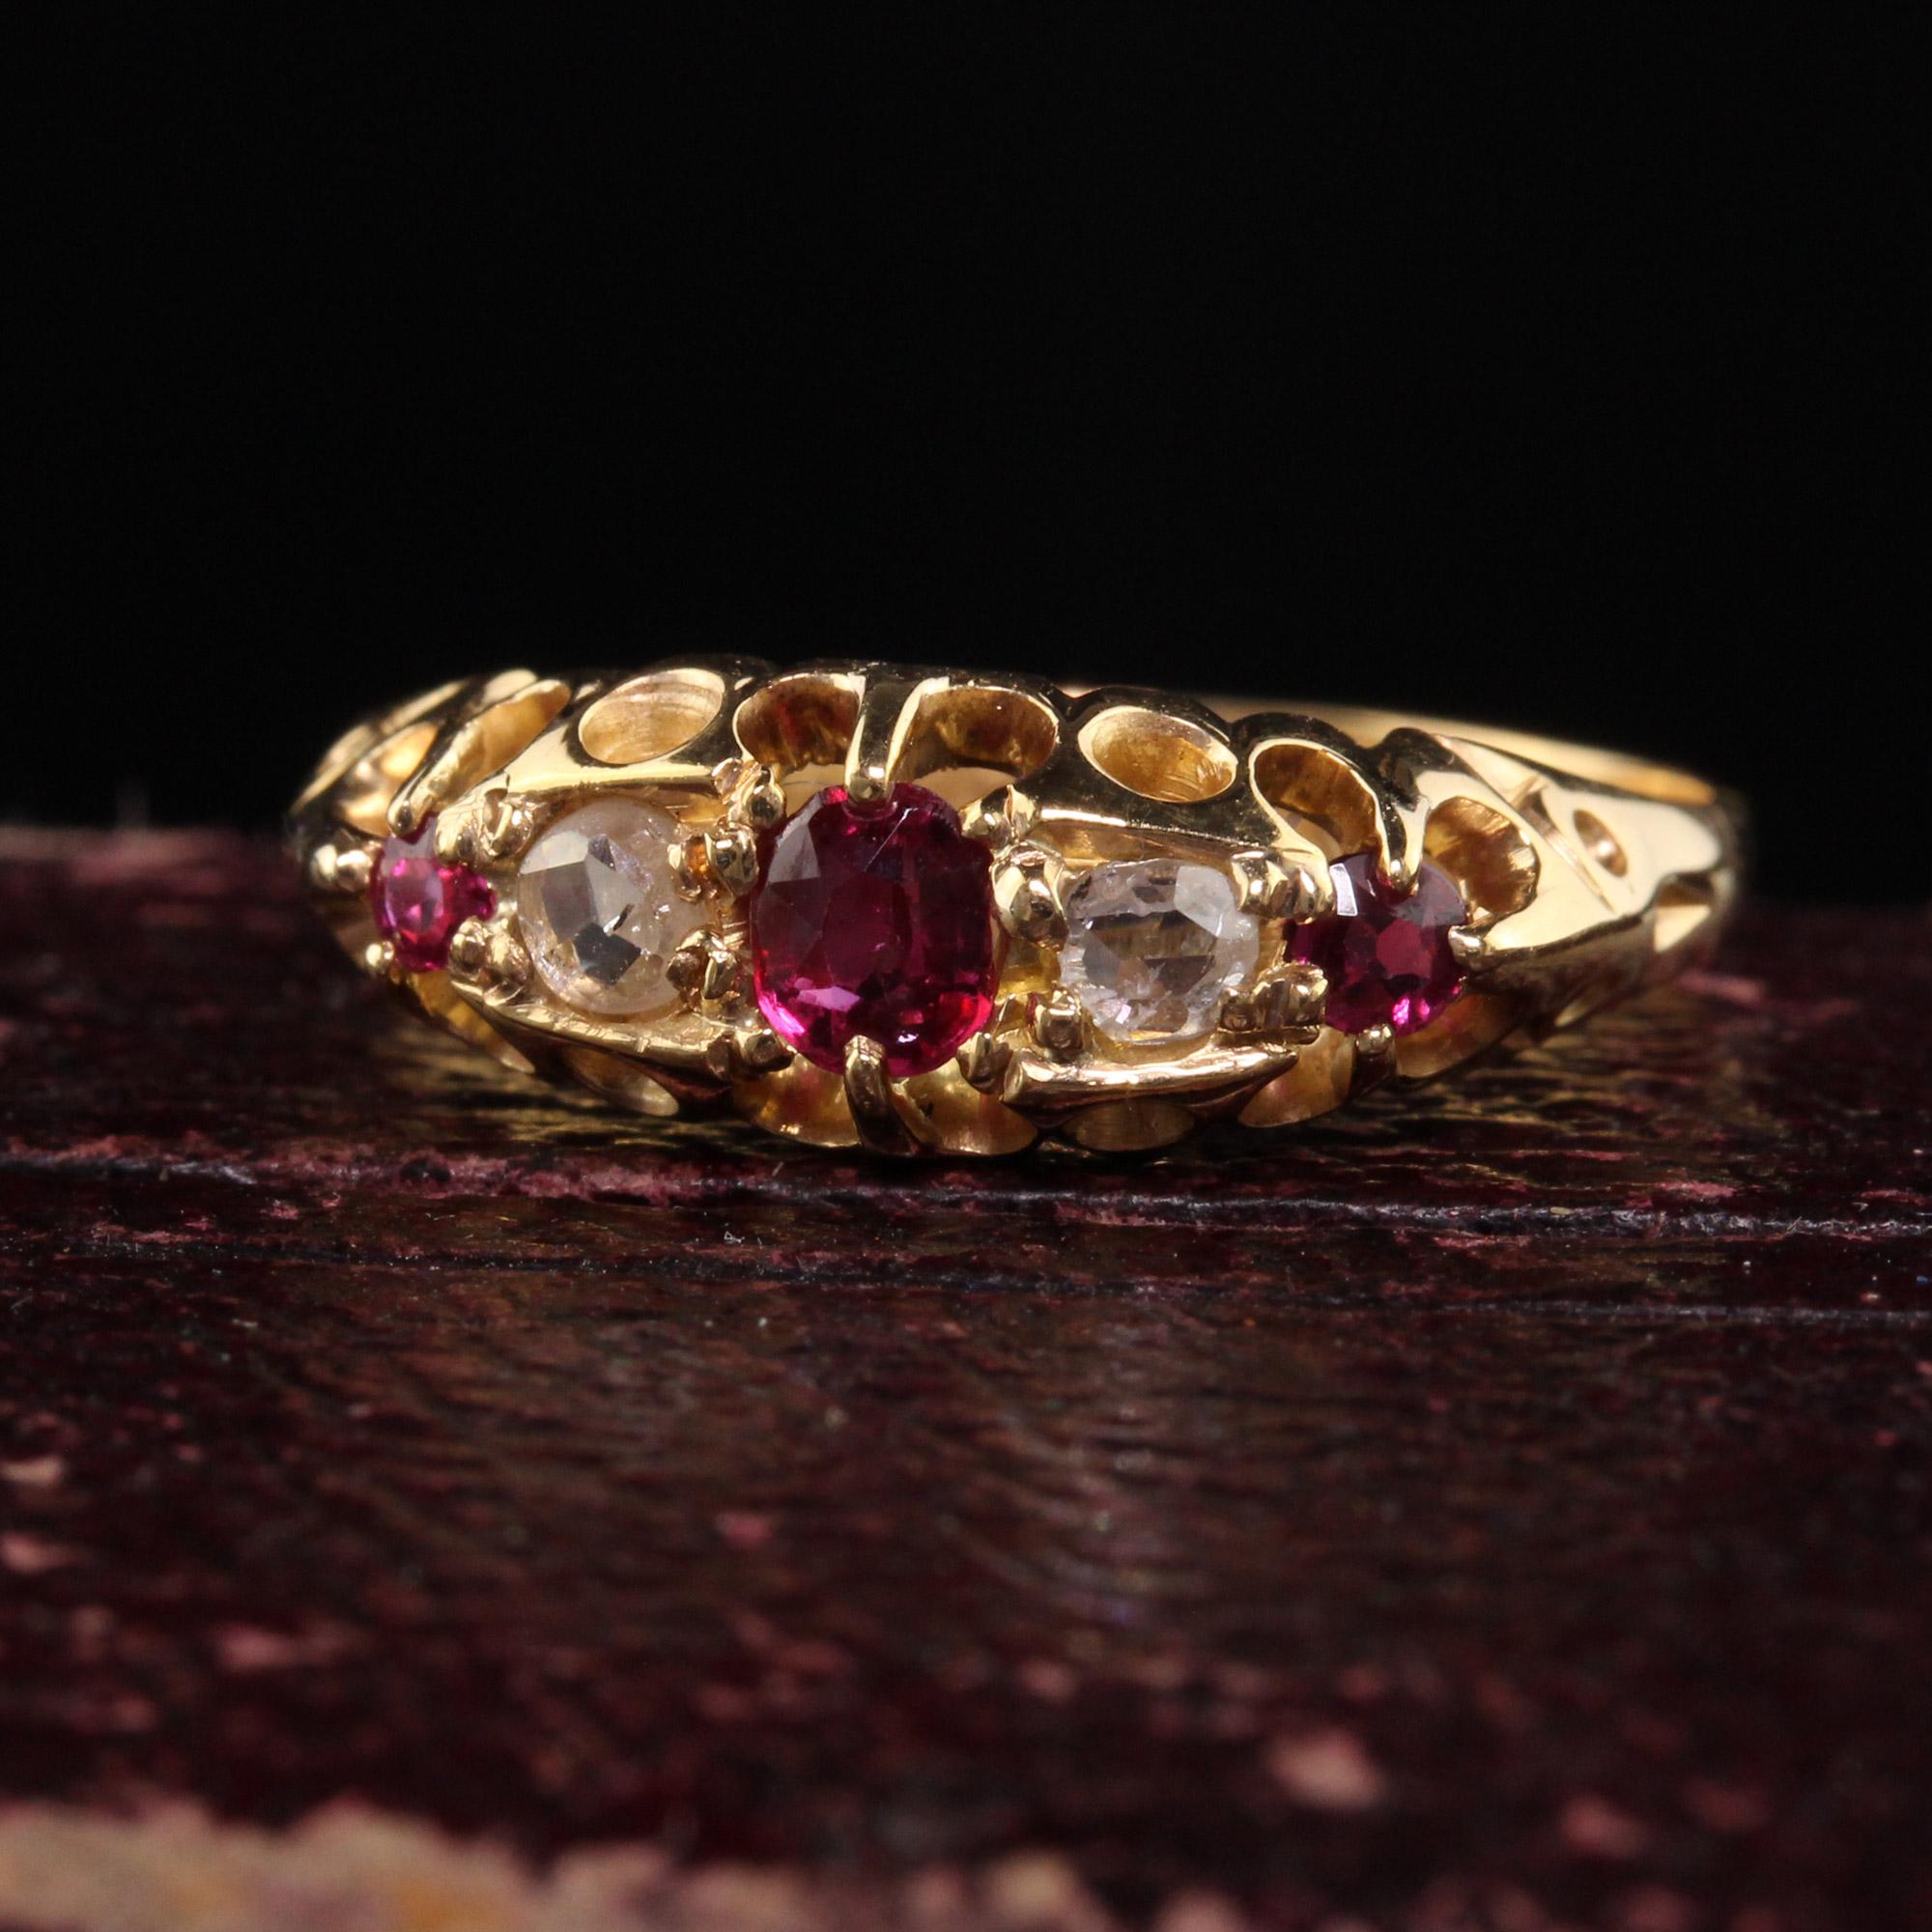 Beautiful Antique Victorian English 18K Yellow Gold Rose Cut Diamond and Ruby Ring. This beautiful ring is crafted in 18k yellow gold and has hallmarks inside the band. The top of the ring has rose cut diamonds and rubies and is in great